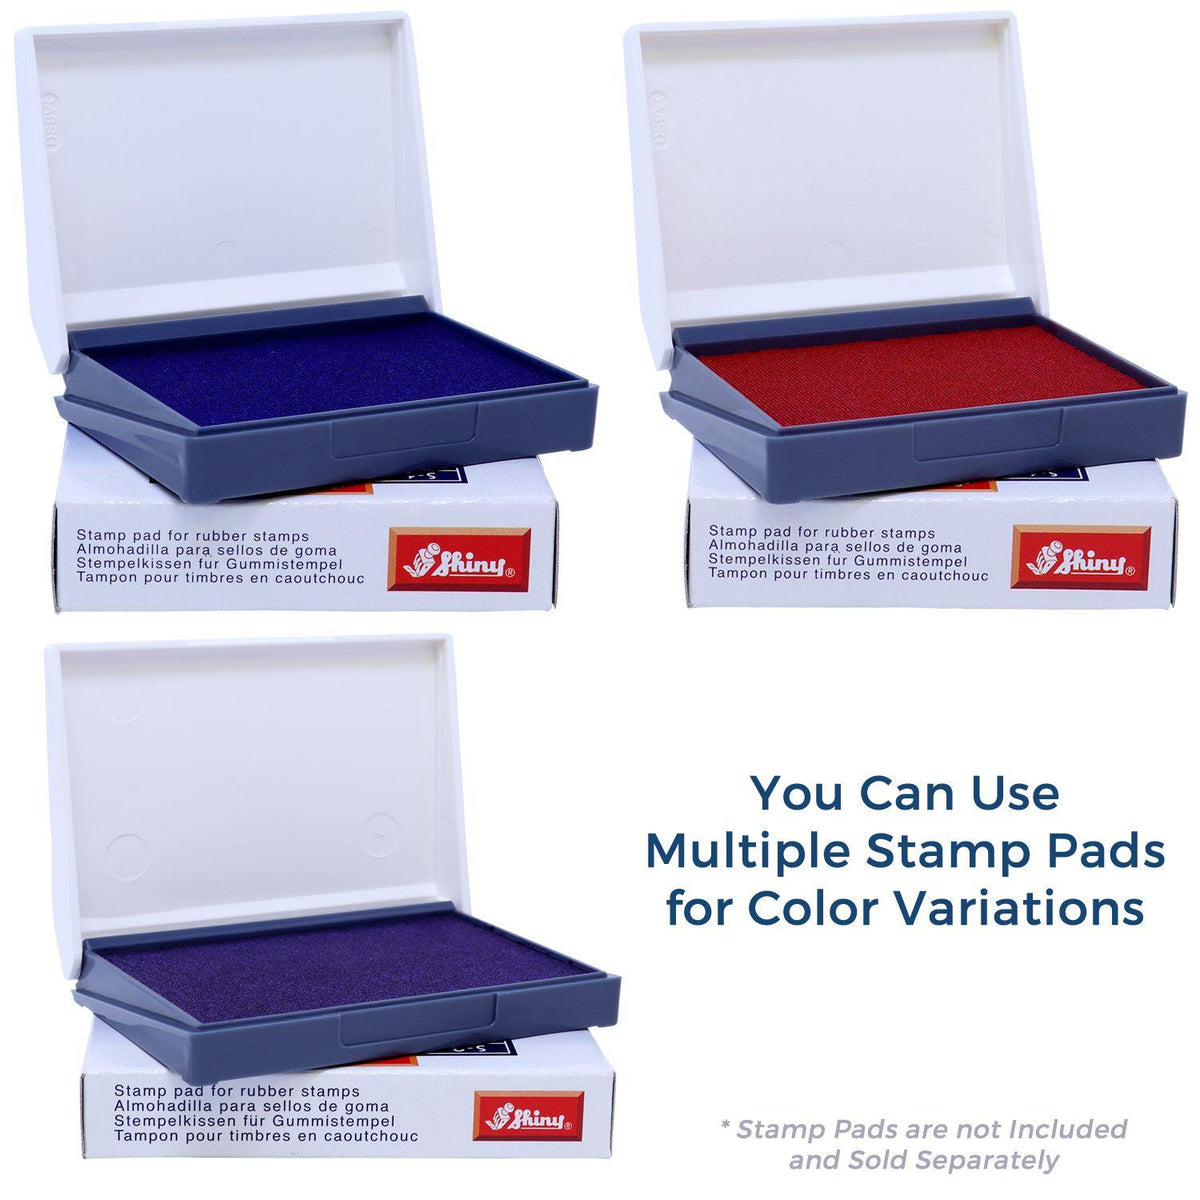 Stamp Pads for Large Final Rubber Stamp Available